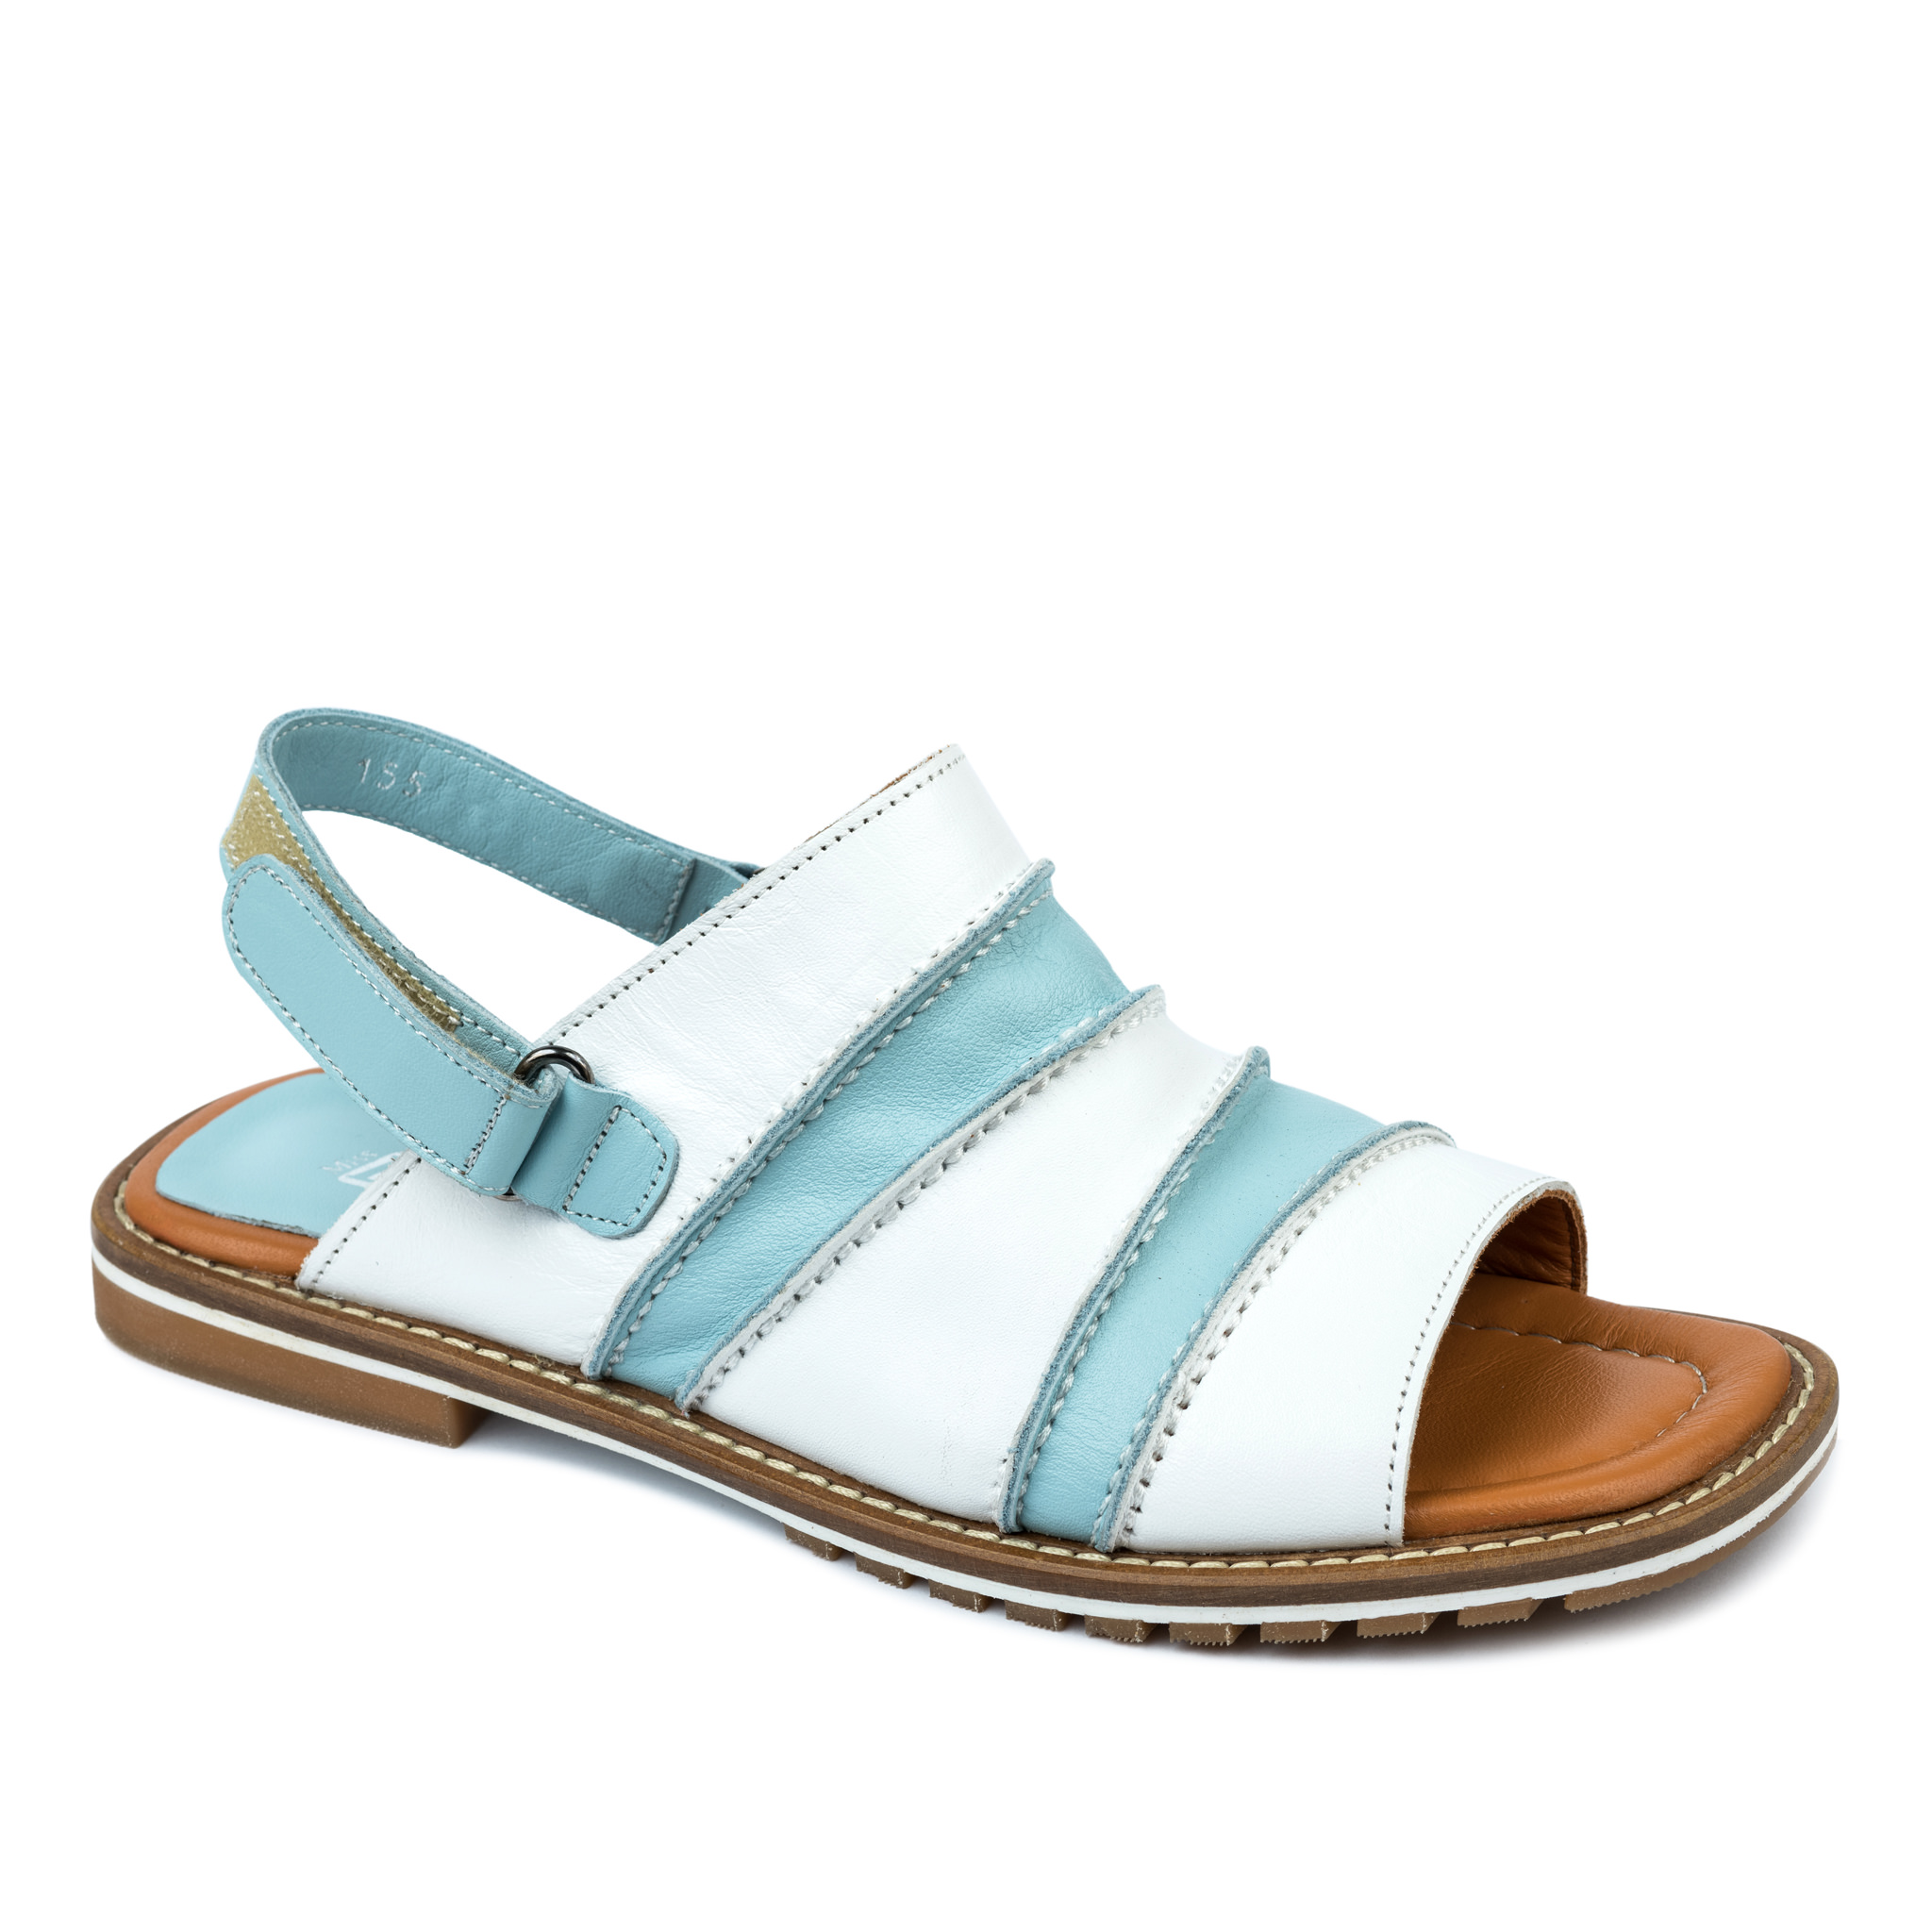 Leather sandals A645 - BLUE